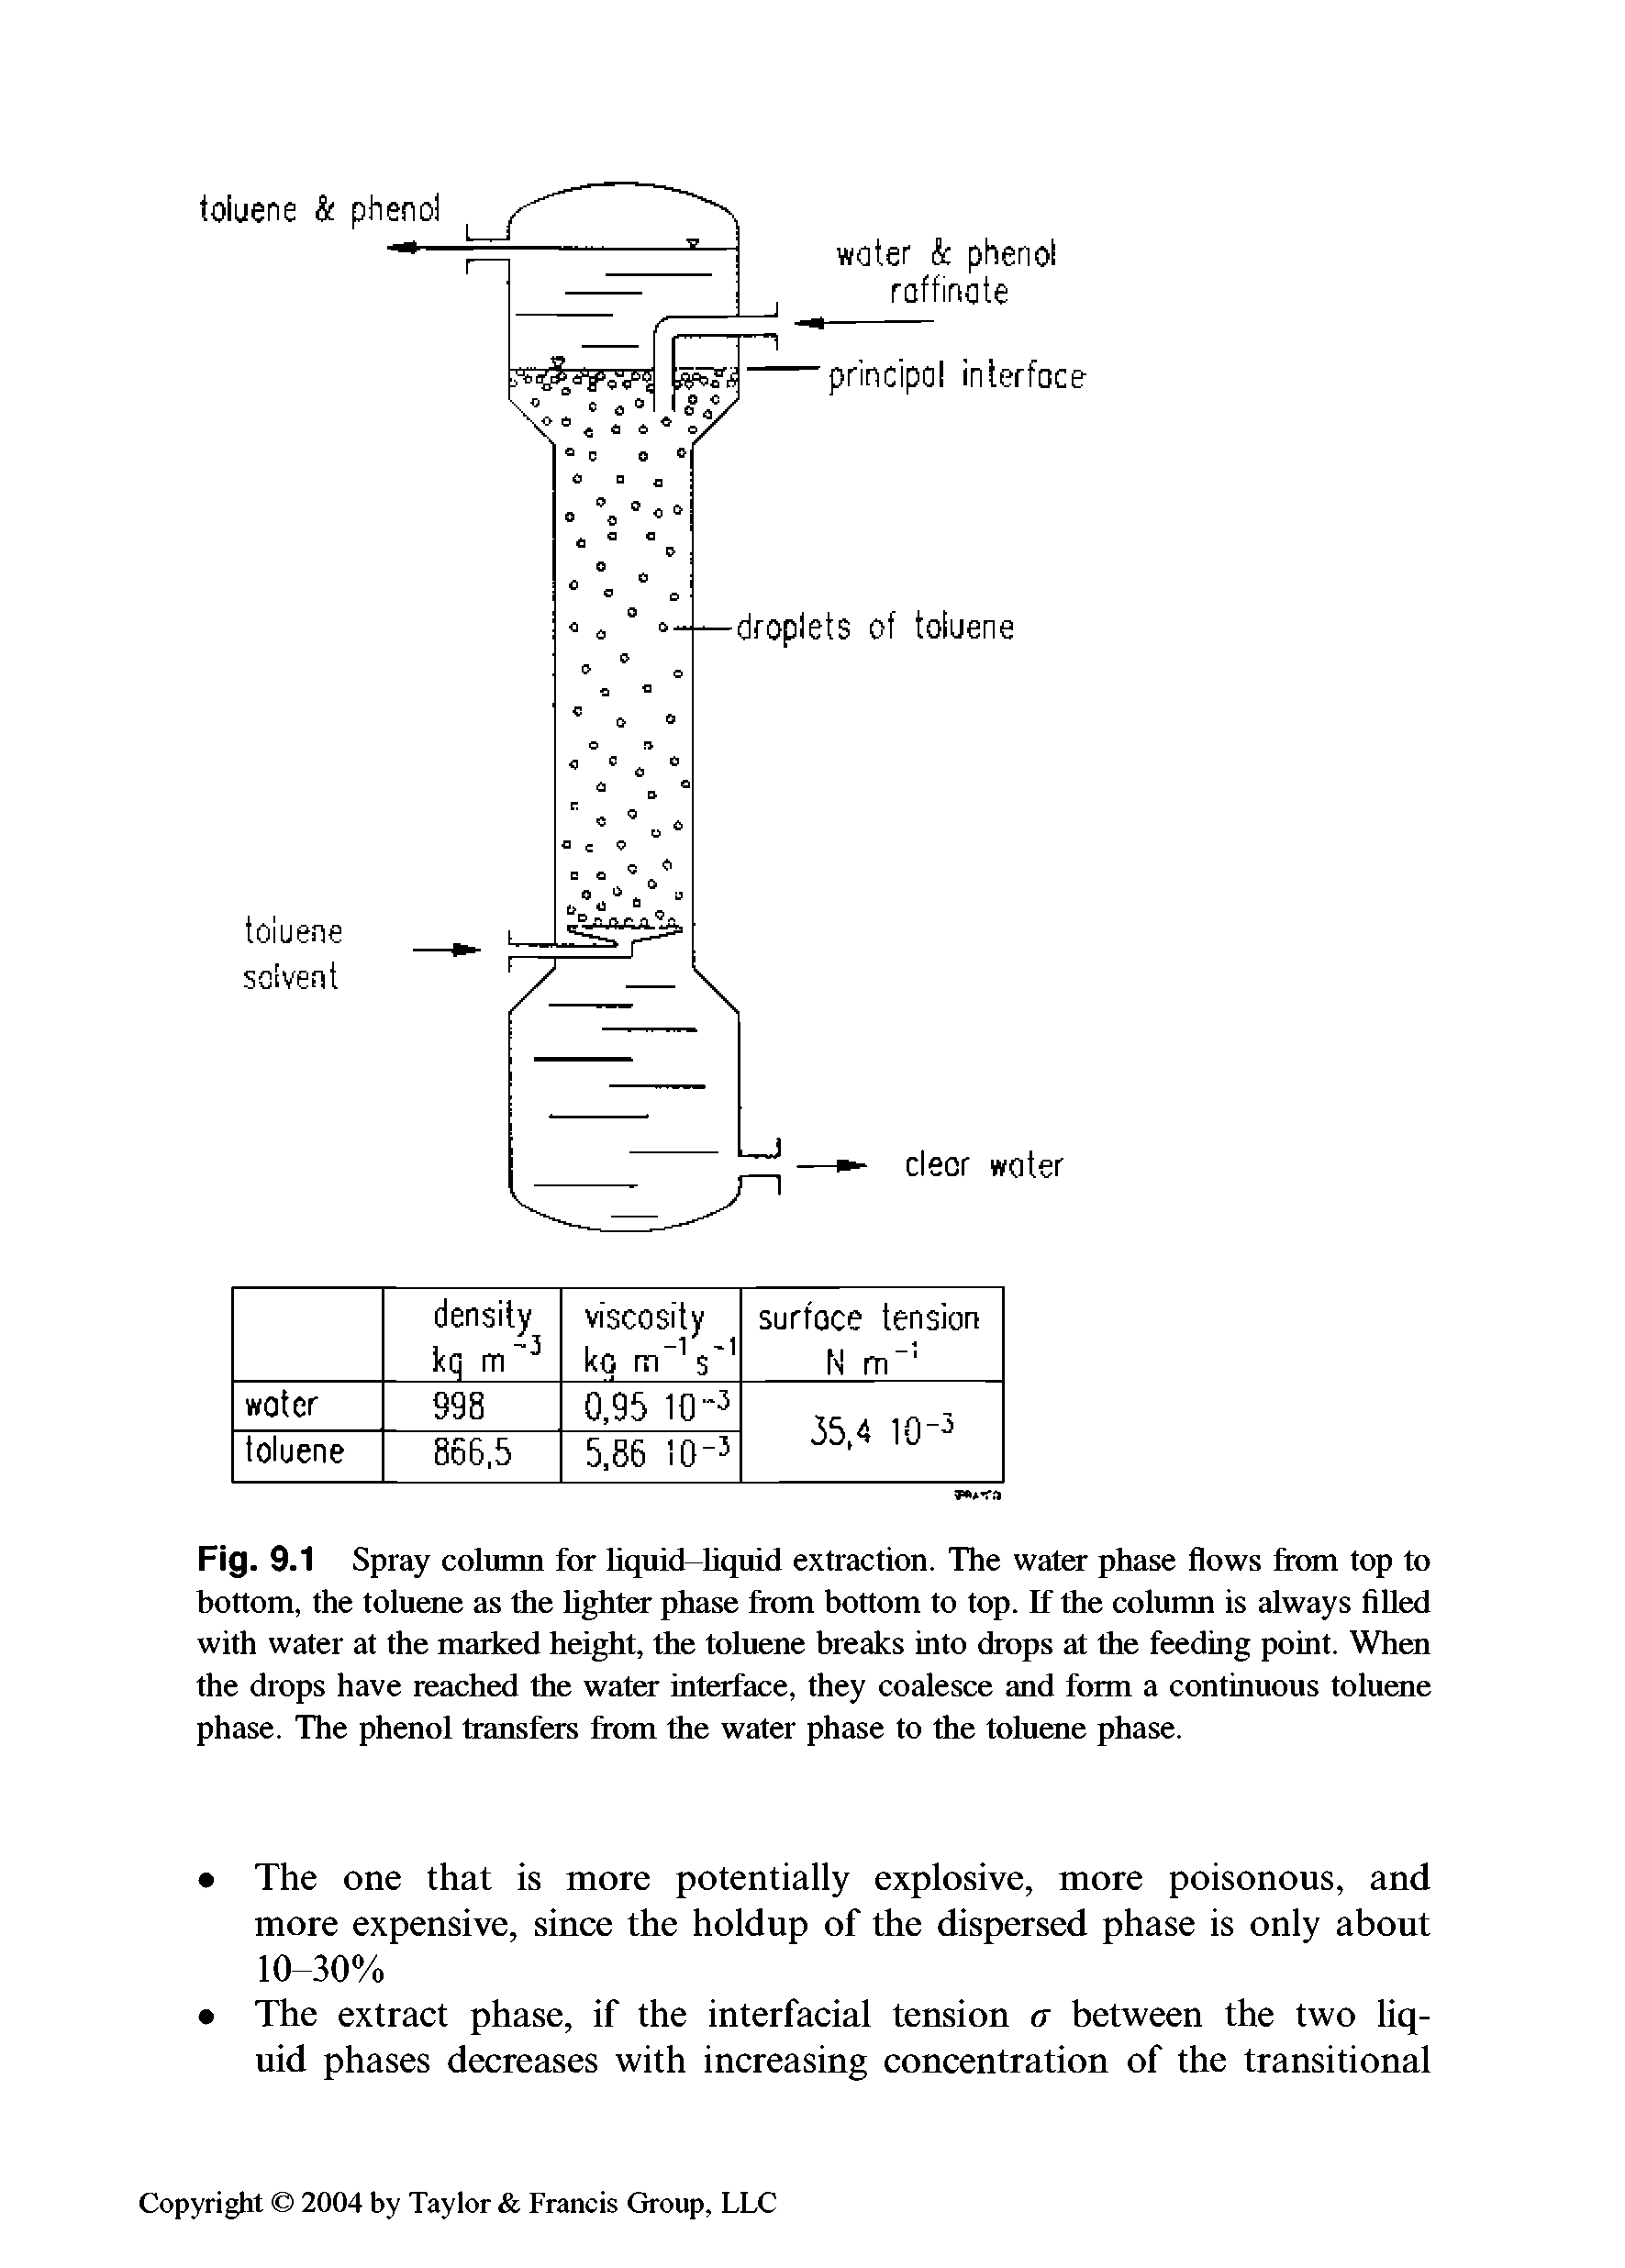 Fig. 9.1 Spray column for Hquid-liquid extraction. The water phase flows from top to bottom, the toluene as the lighter phase from bottom to top. If the column is always filled with water at the marked height, the toluene breaks into drops at the feeding point. When the drops have reached the water interface, they coalesce and form a continuous toluene phase. The phenol transfers from the water phase to the toluene phase.